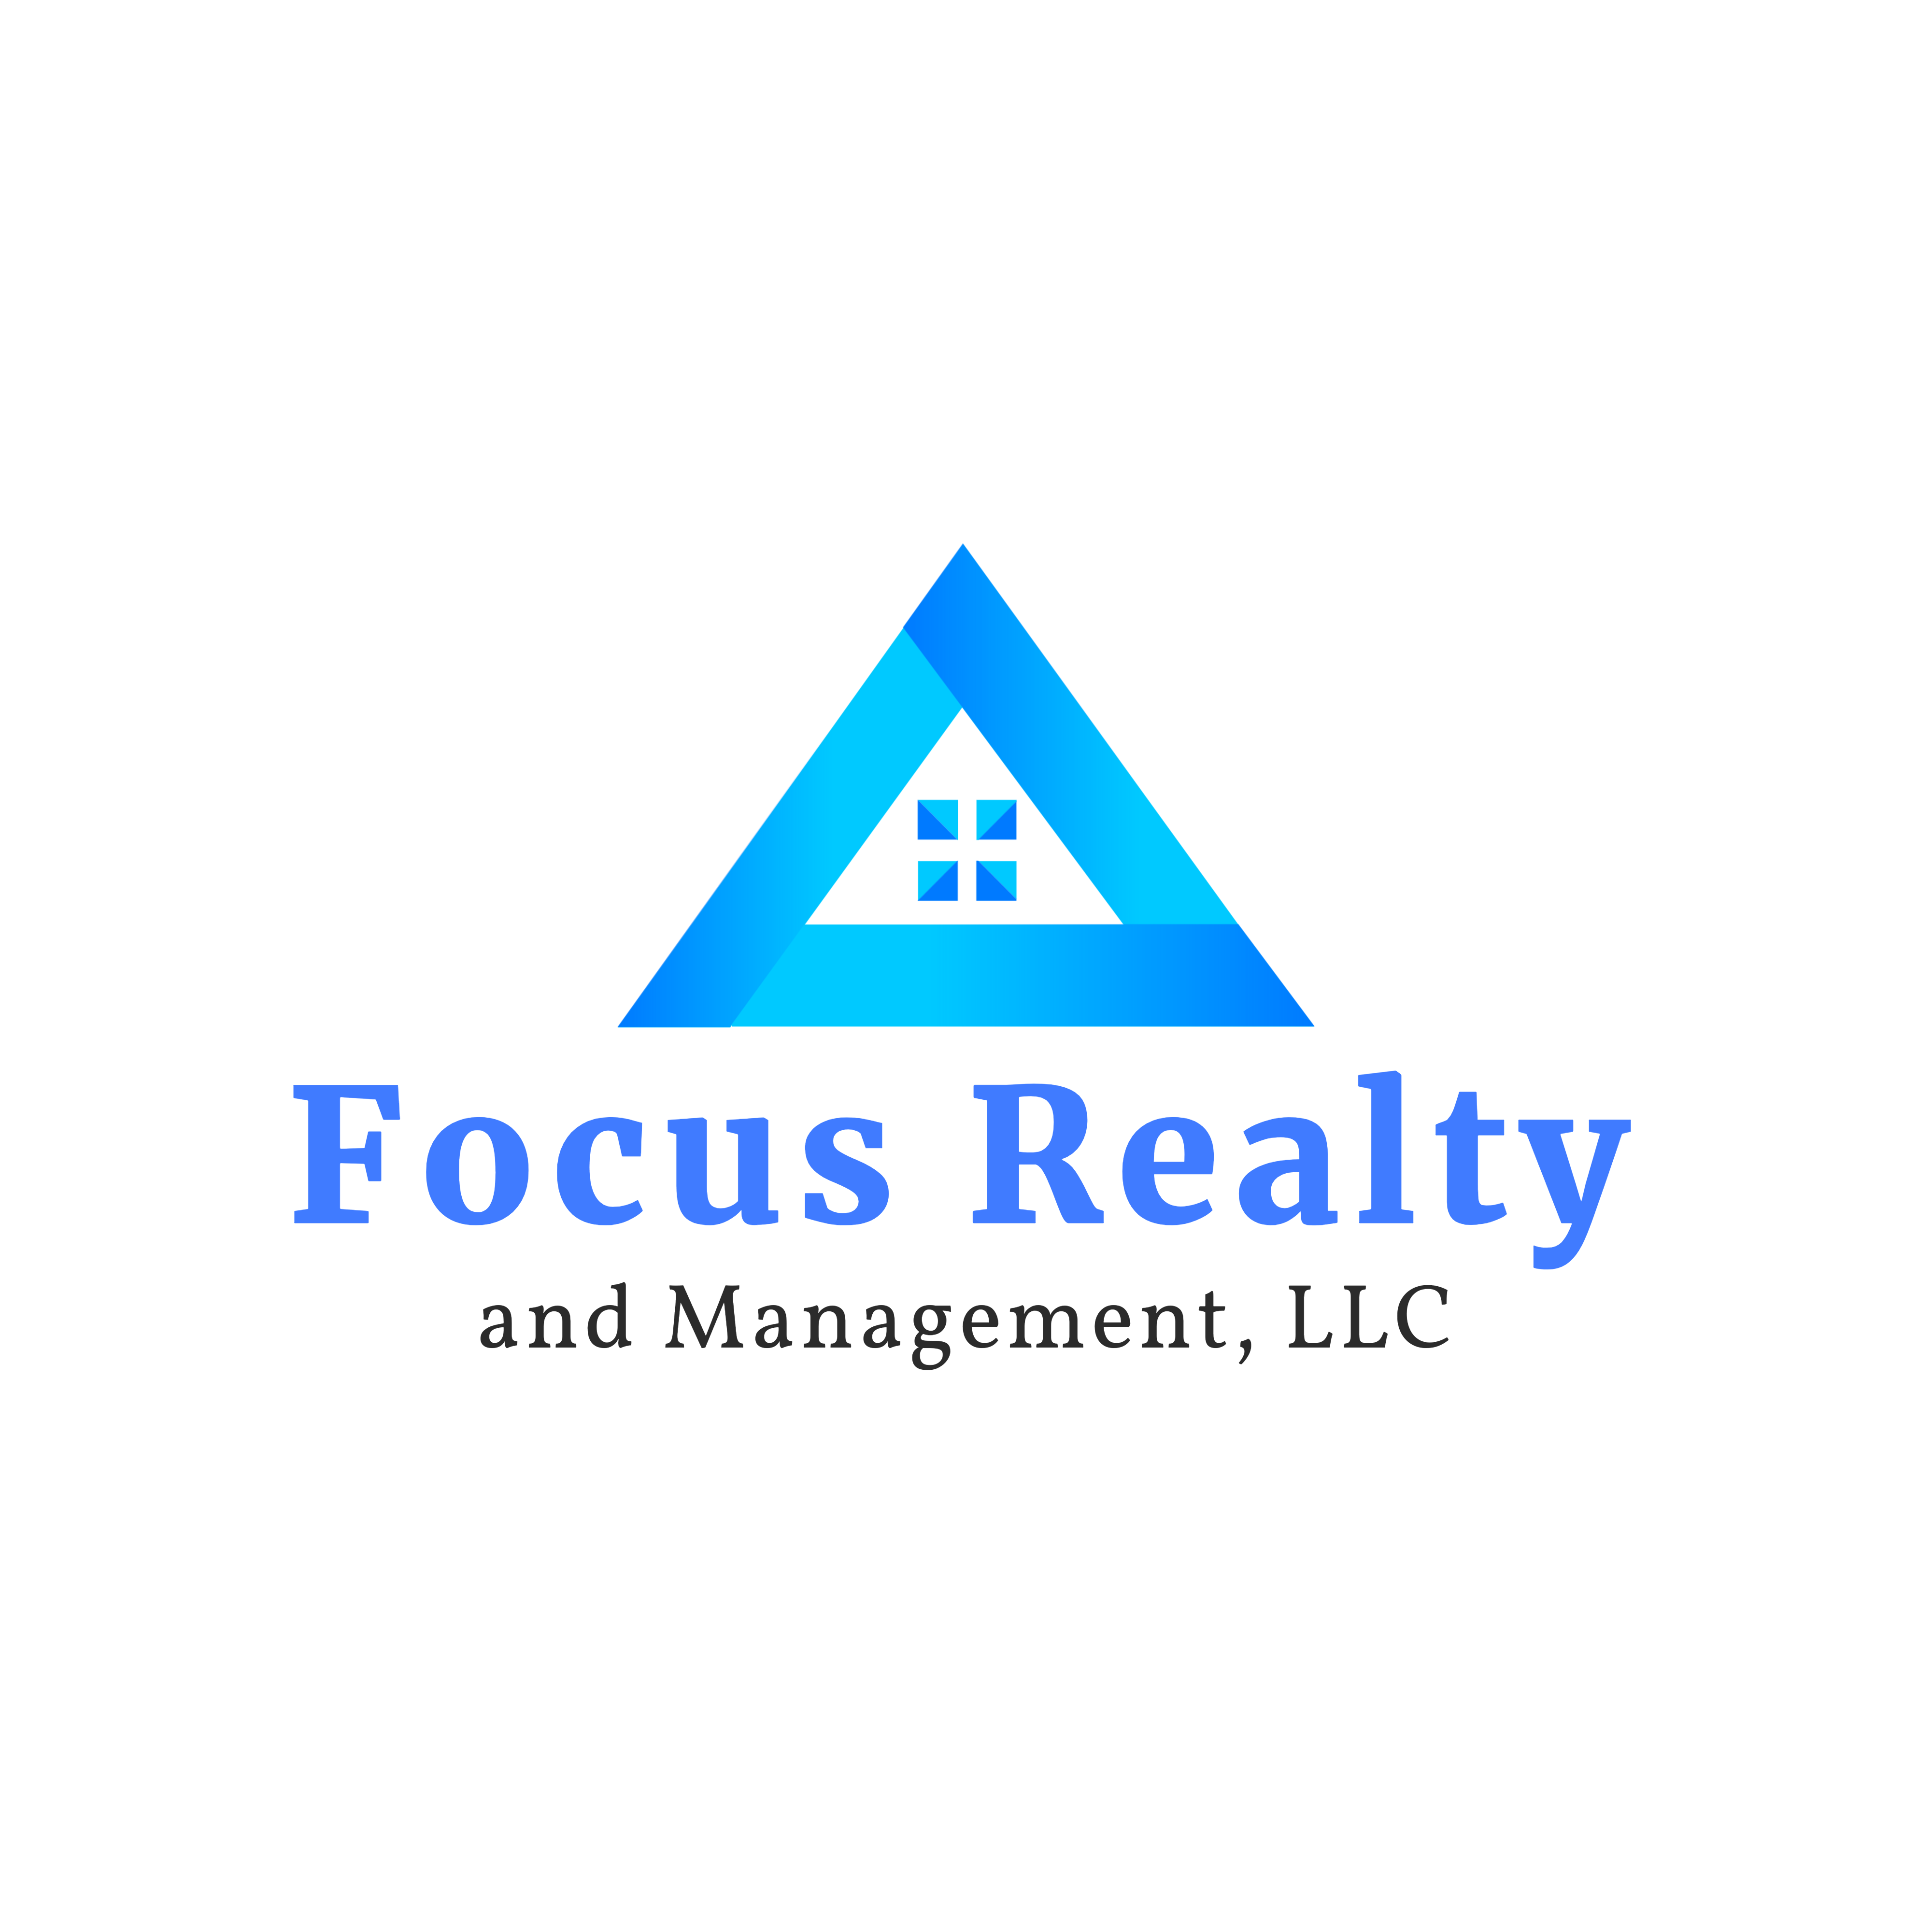 Focus Realty and Management